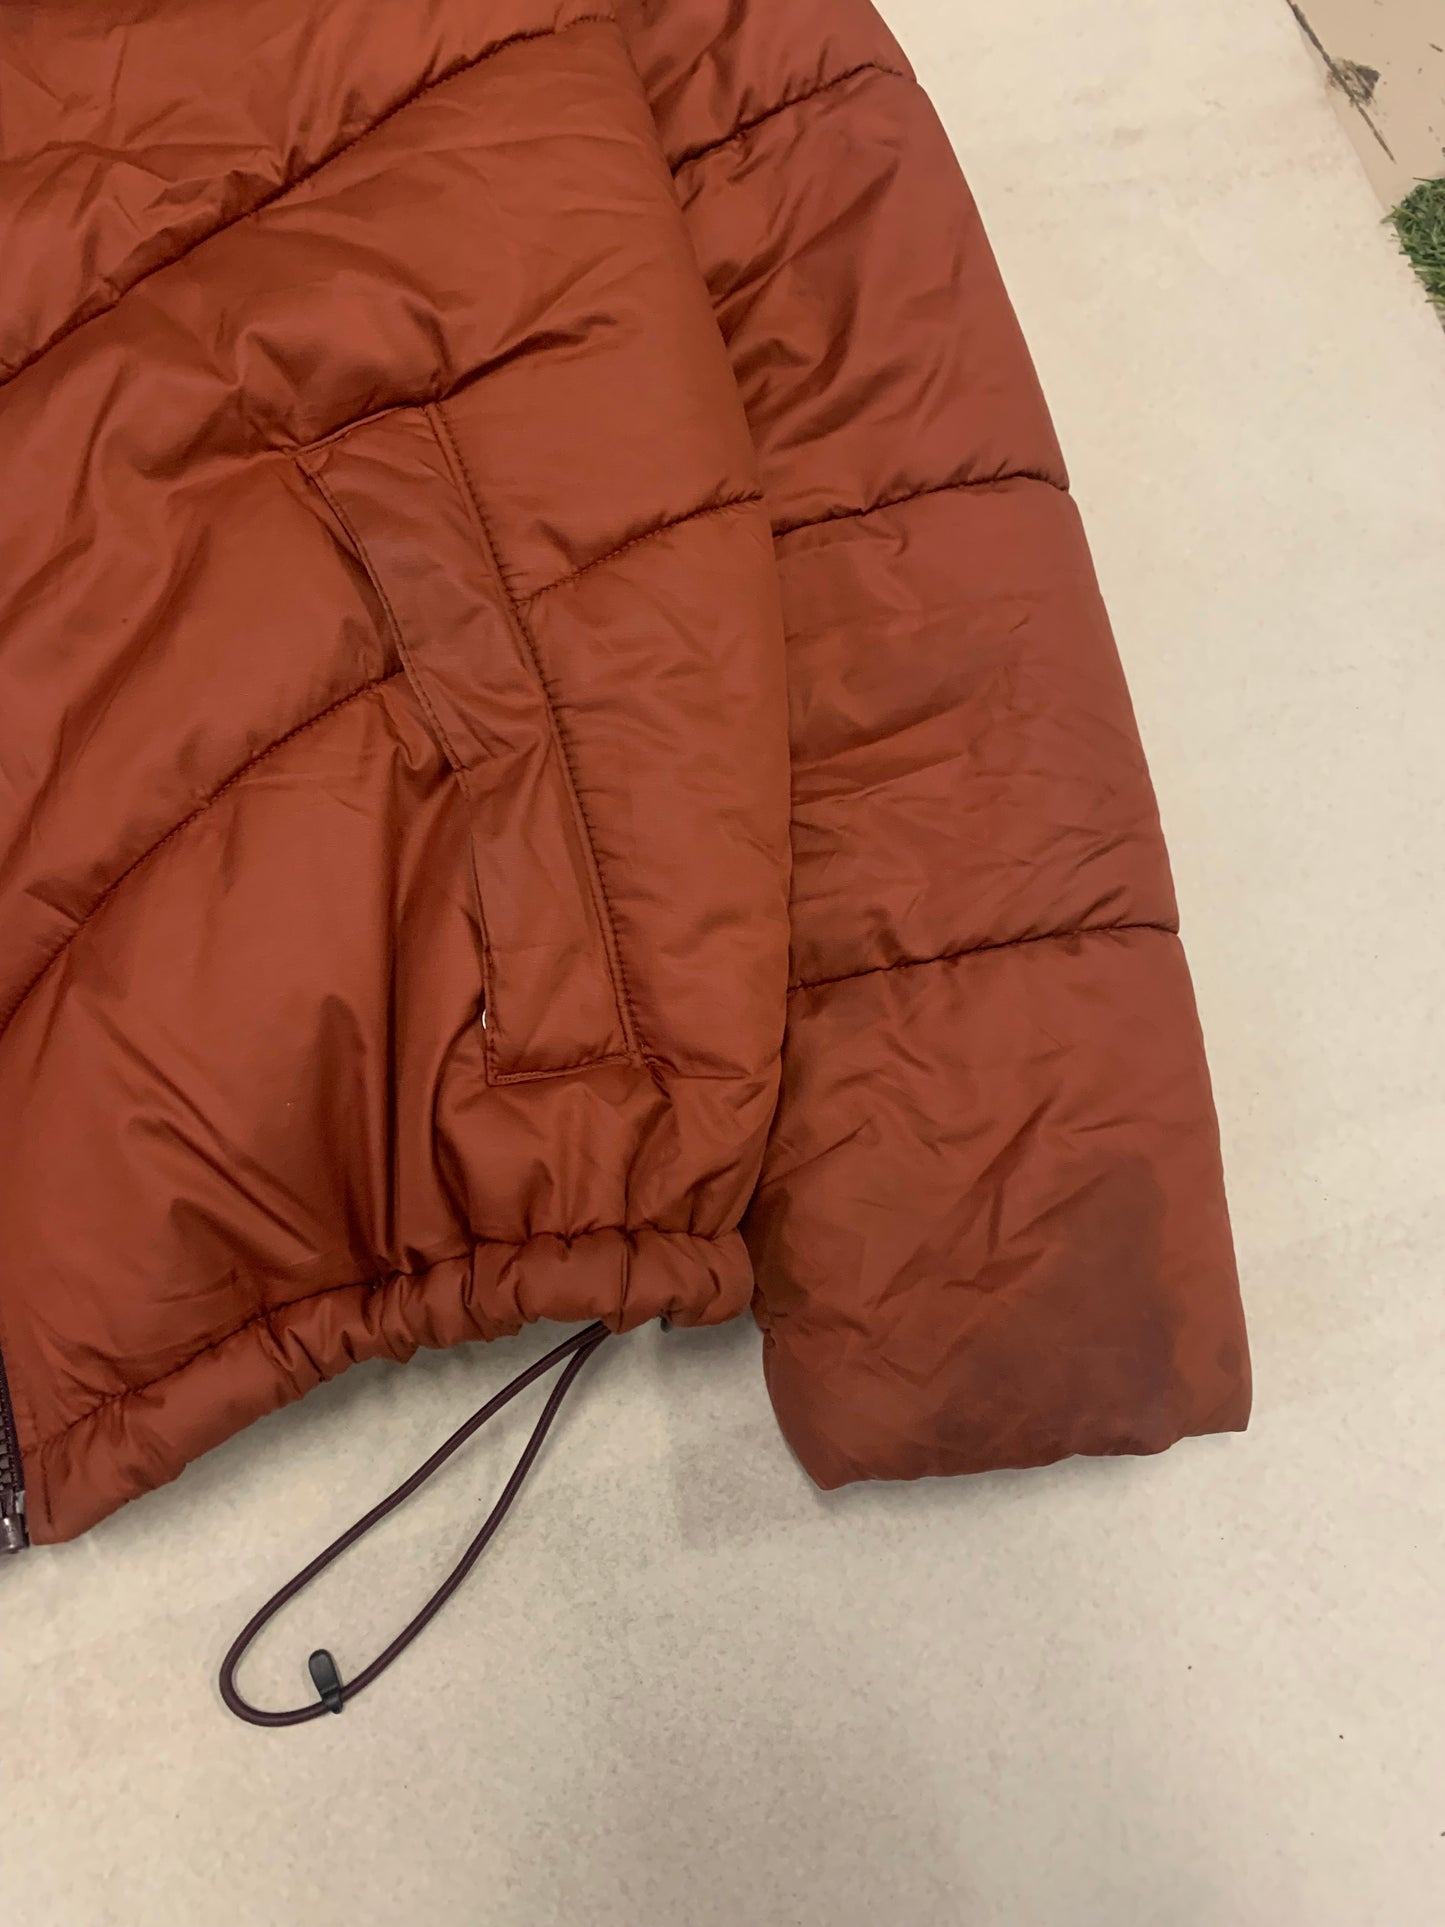 The North Face Vintage Puffer Jacket - S